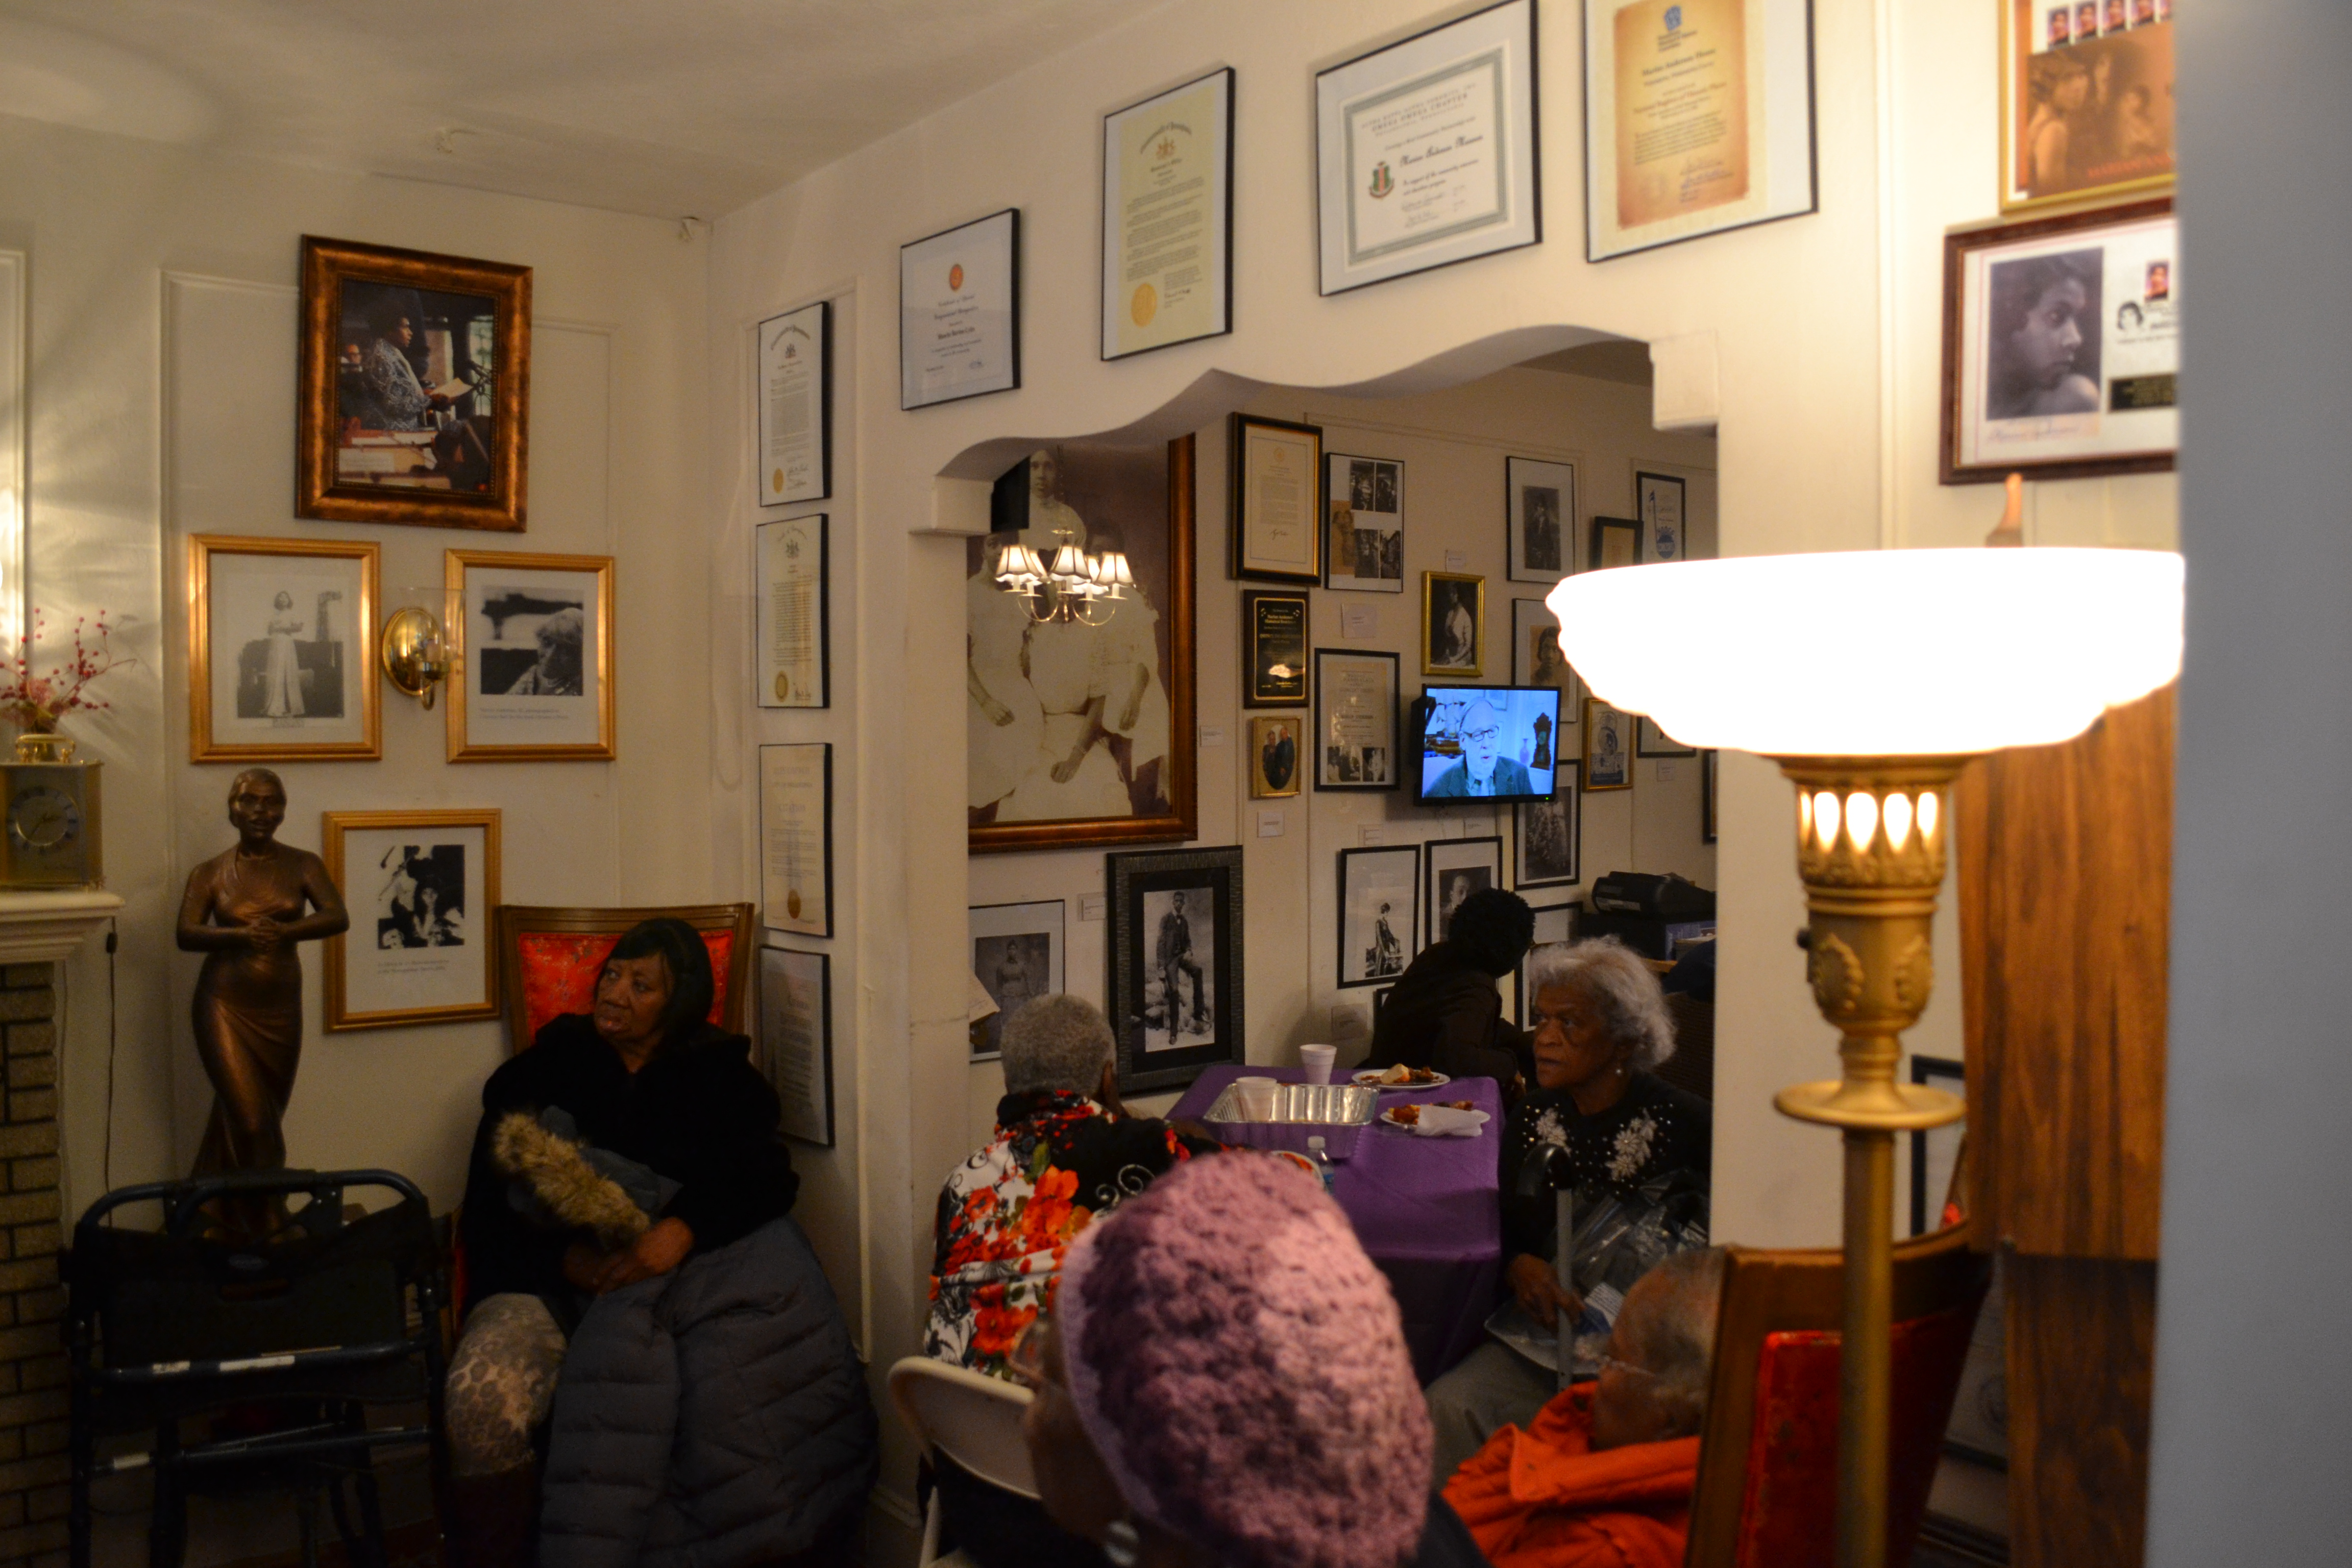 Photos, plaques and certificates line the wall of Anderson's home, now the Marian Anderson Residence Museum